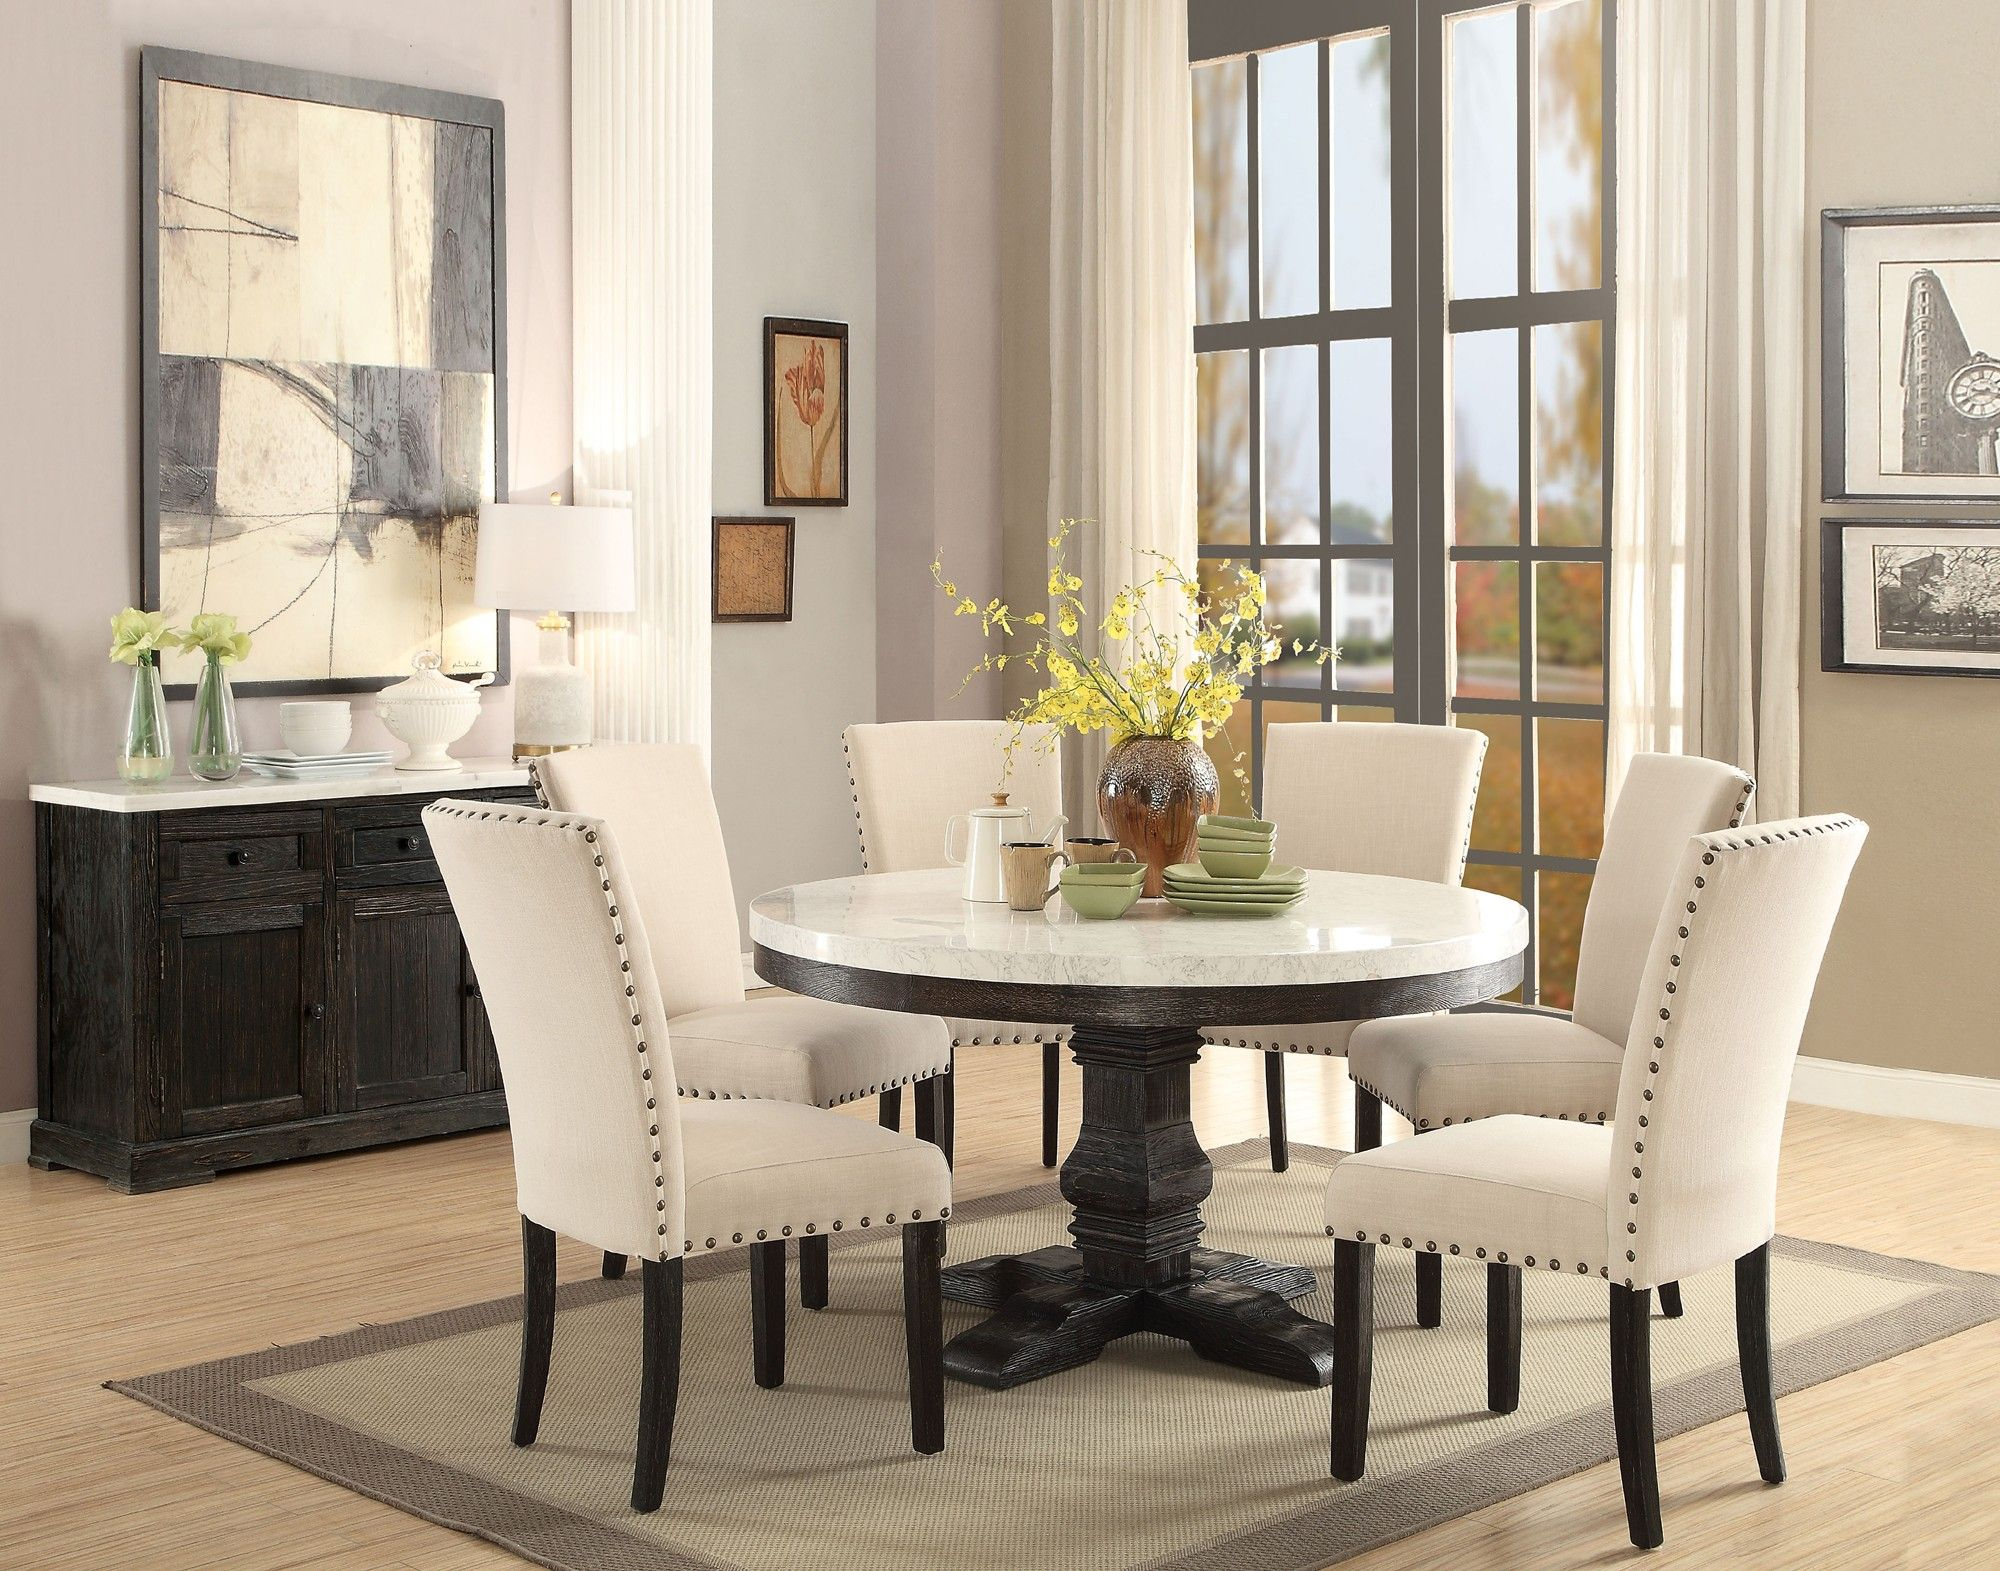 Acme 72845 Nolan 5pcs White Marble Top Round Dining Table within size 2000 X 1571